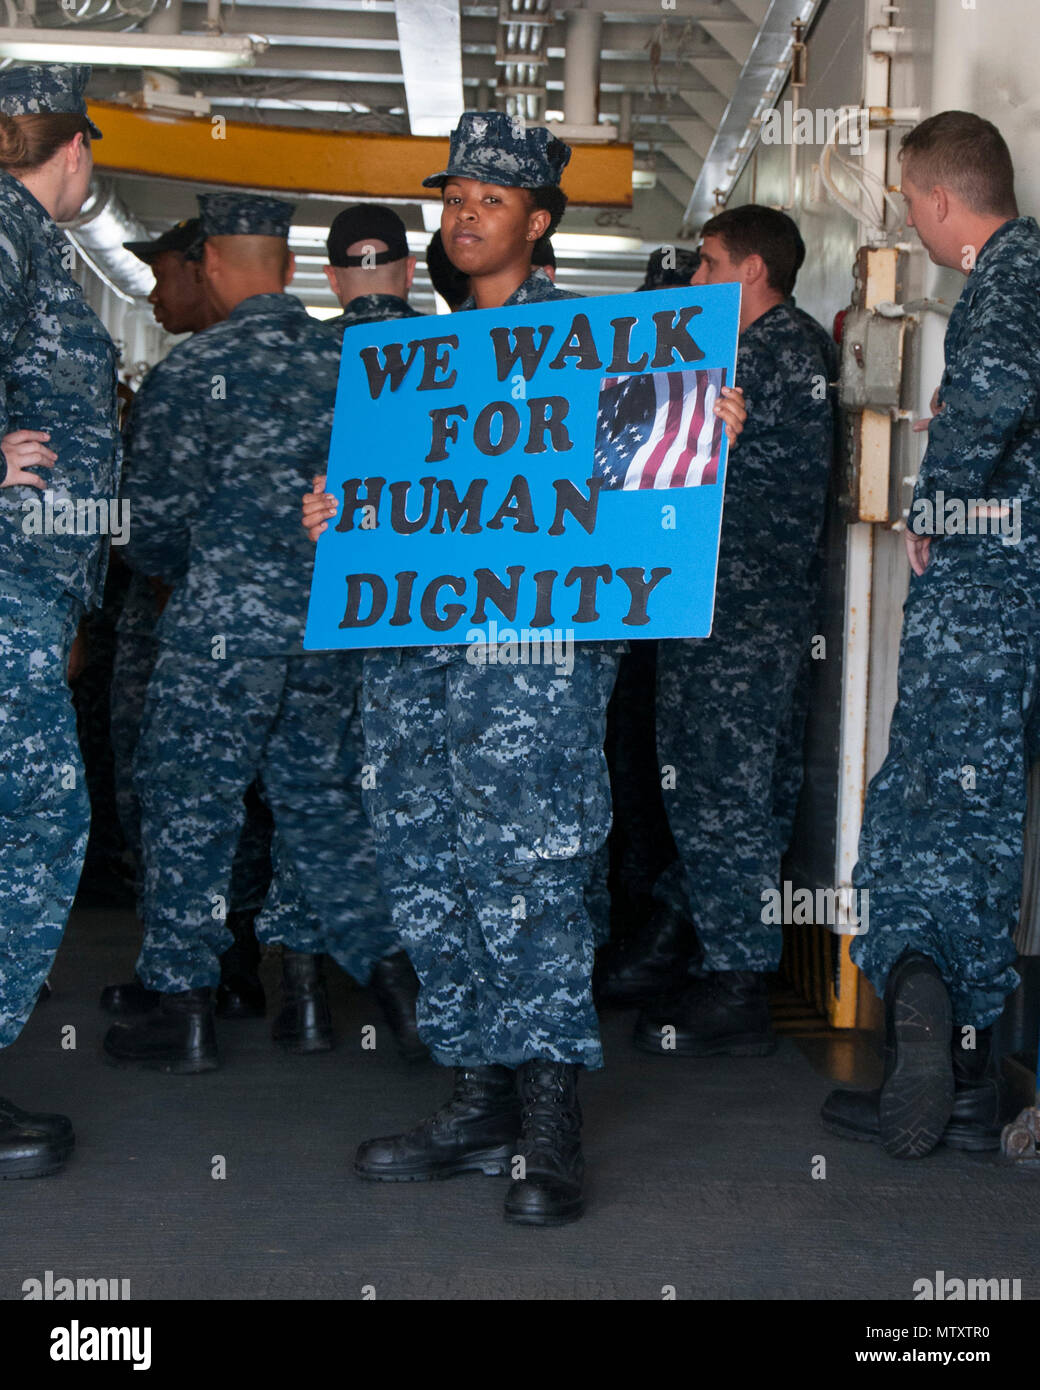 170131-N-DS883-003    SANTA RITA, Guam (Jan. 31, 2017) Hospital Corpsman 3rd Class Sophie Karanja, a Sailor assigned to the submarine tender USS Frank Cable (AS 40), holds a sign before beginning a march honoring Dr. Martin Luther King Jr. aboard the ship, January 31. The ship’s diversity committee held the event to reenact the1965 Selma-to-Montgomery March for voting rights led by Martin Luther King Jr.’s Southern Christian Leadership Conference. (U.S. Navy photo by Mass Communication Specialist Seaman Heather C. Wamsley/Released) Stock Photo